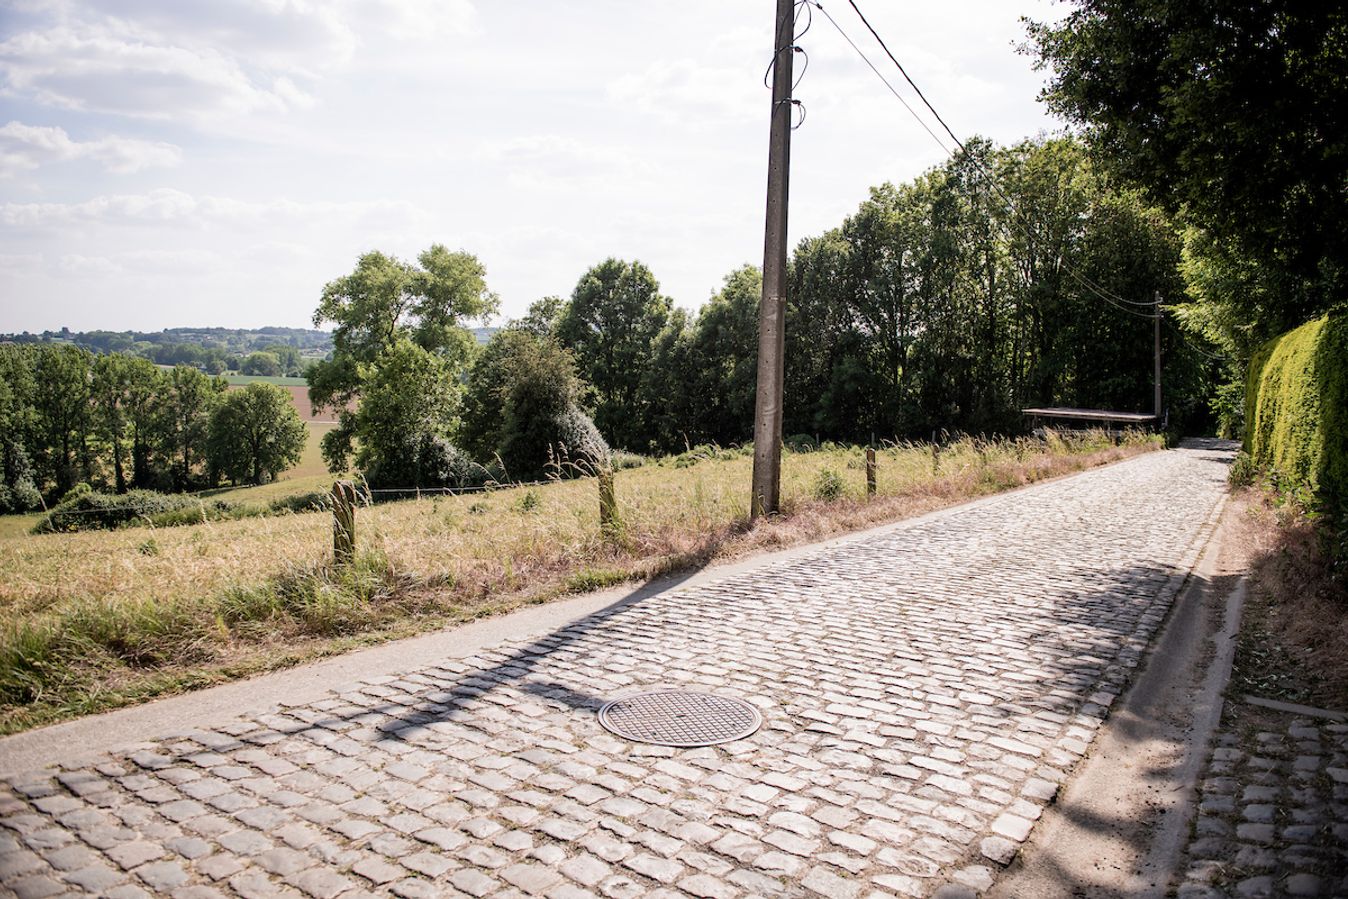 The Taaienberg cobbles